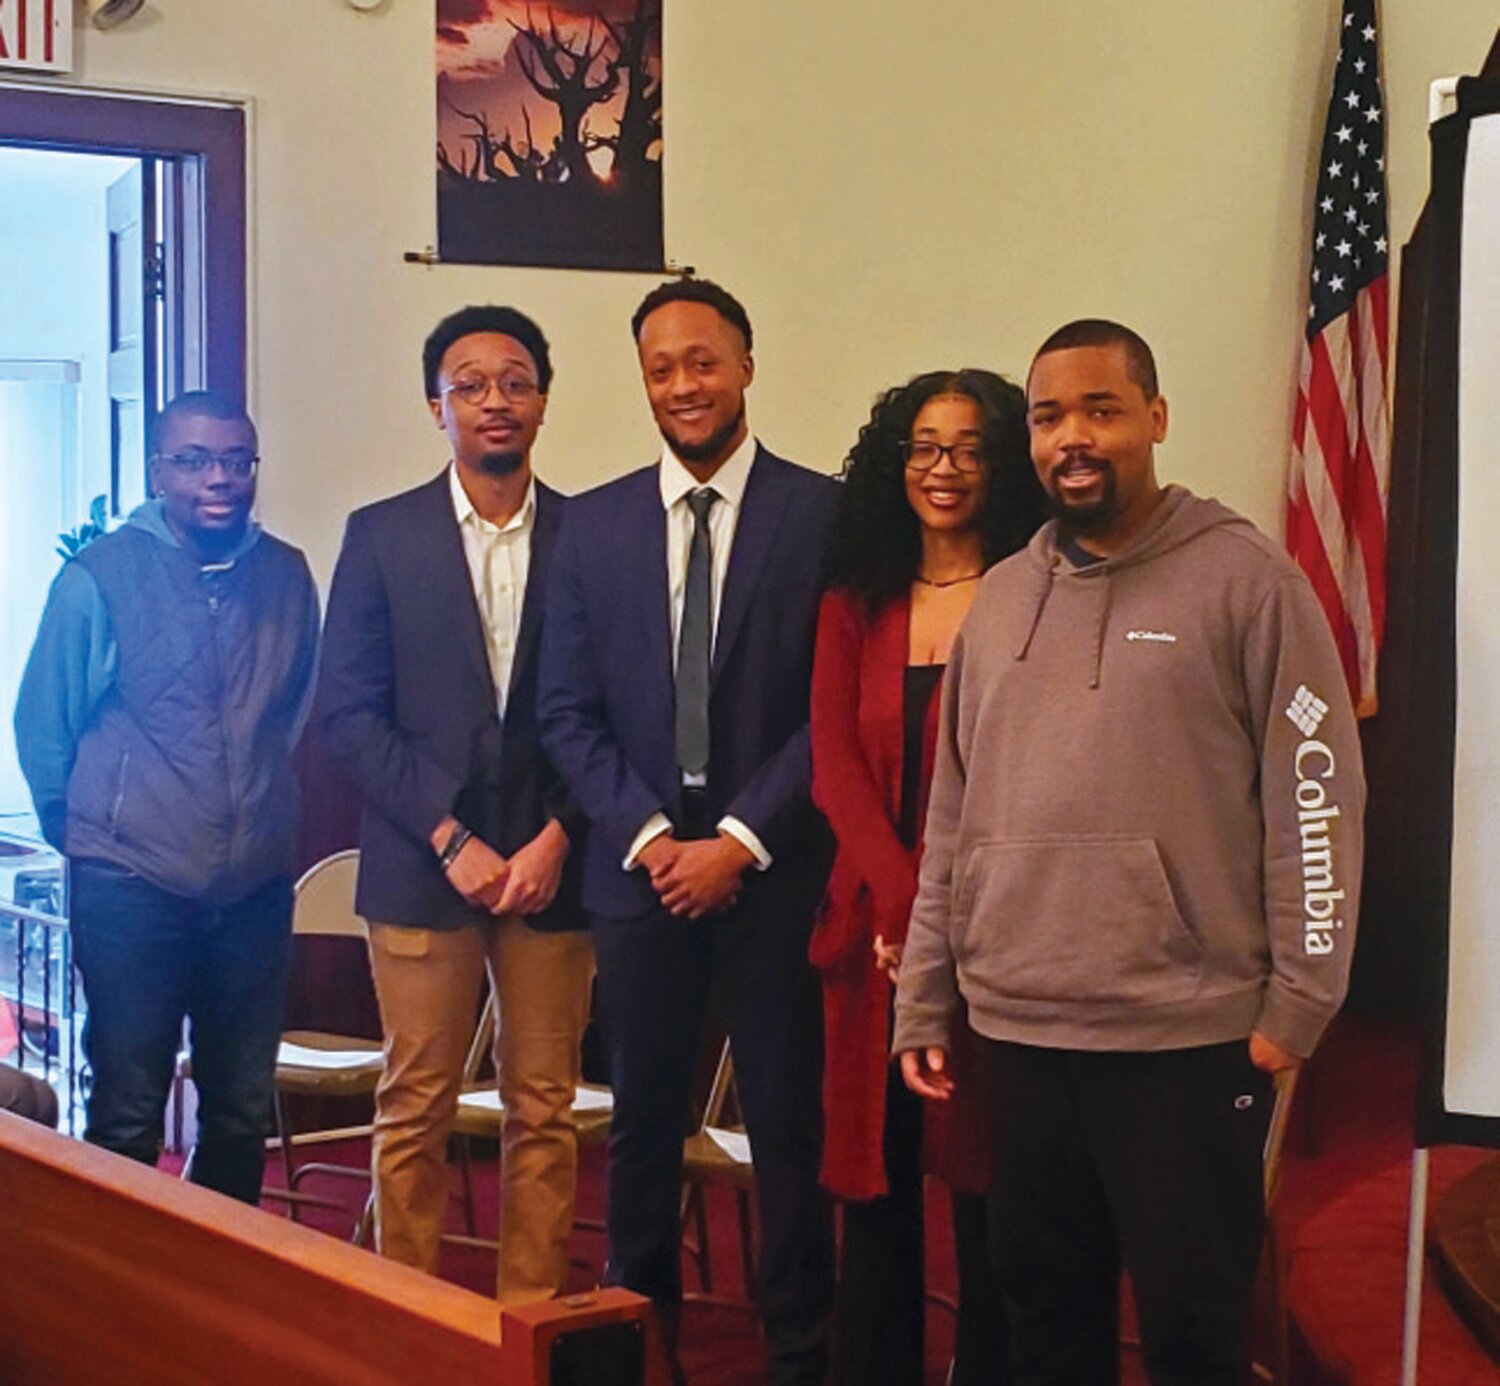 Members of the church’s youth group presented a slide history of Bethlehem AME Church. From left are, Tony Clark, Dante Herder, Avery Herder, Brianna Herder, and David Clark.